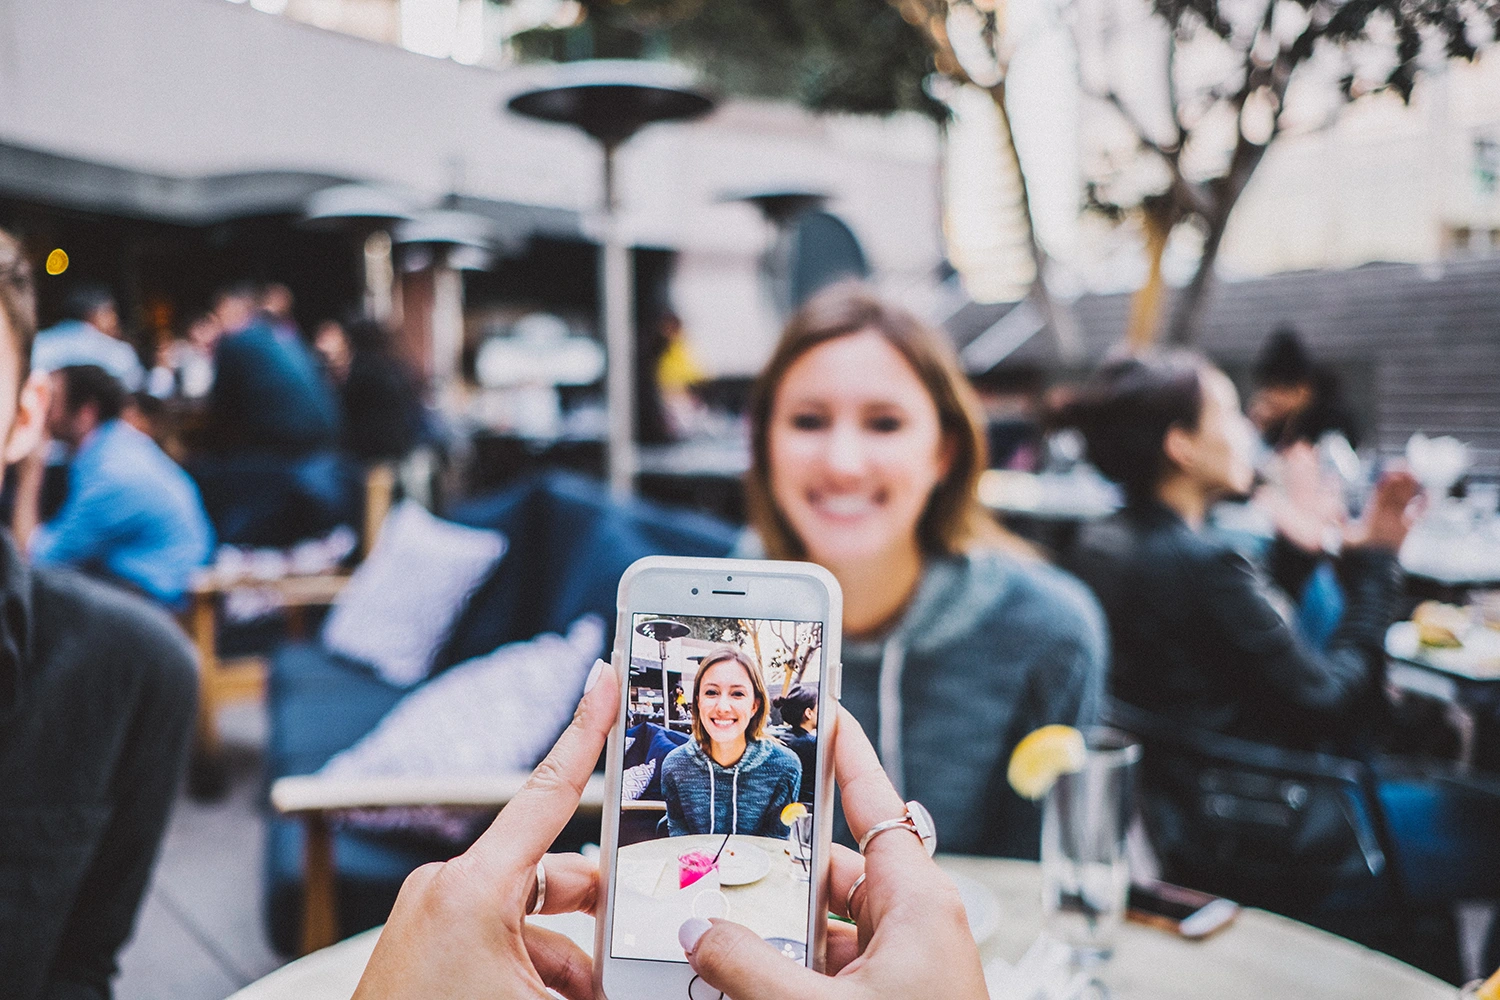 Someone holding a phone and capturing a woman's picture at an outdoor eatery; perhaps they visited because of the restaurant's email newsletter.